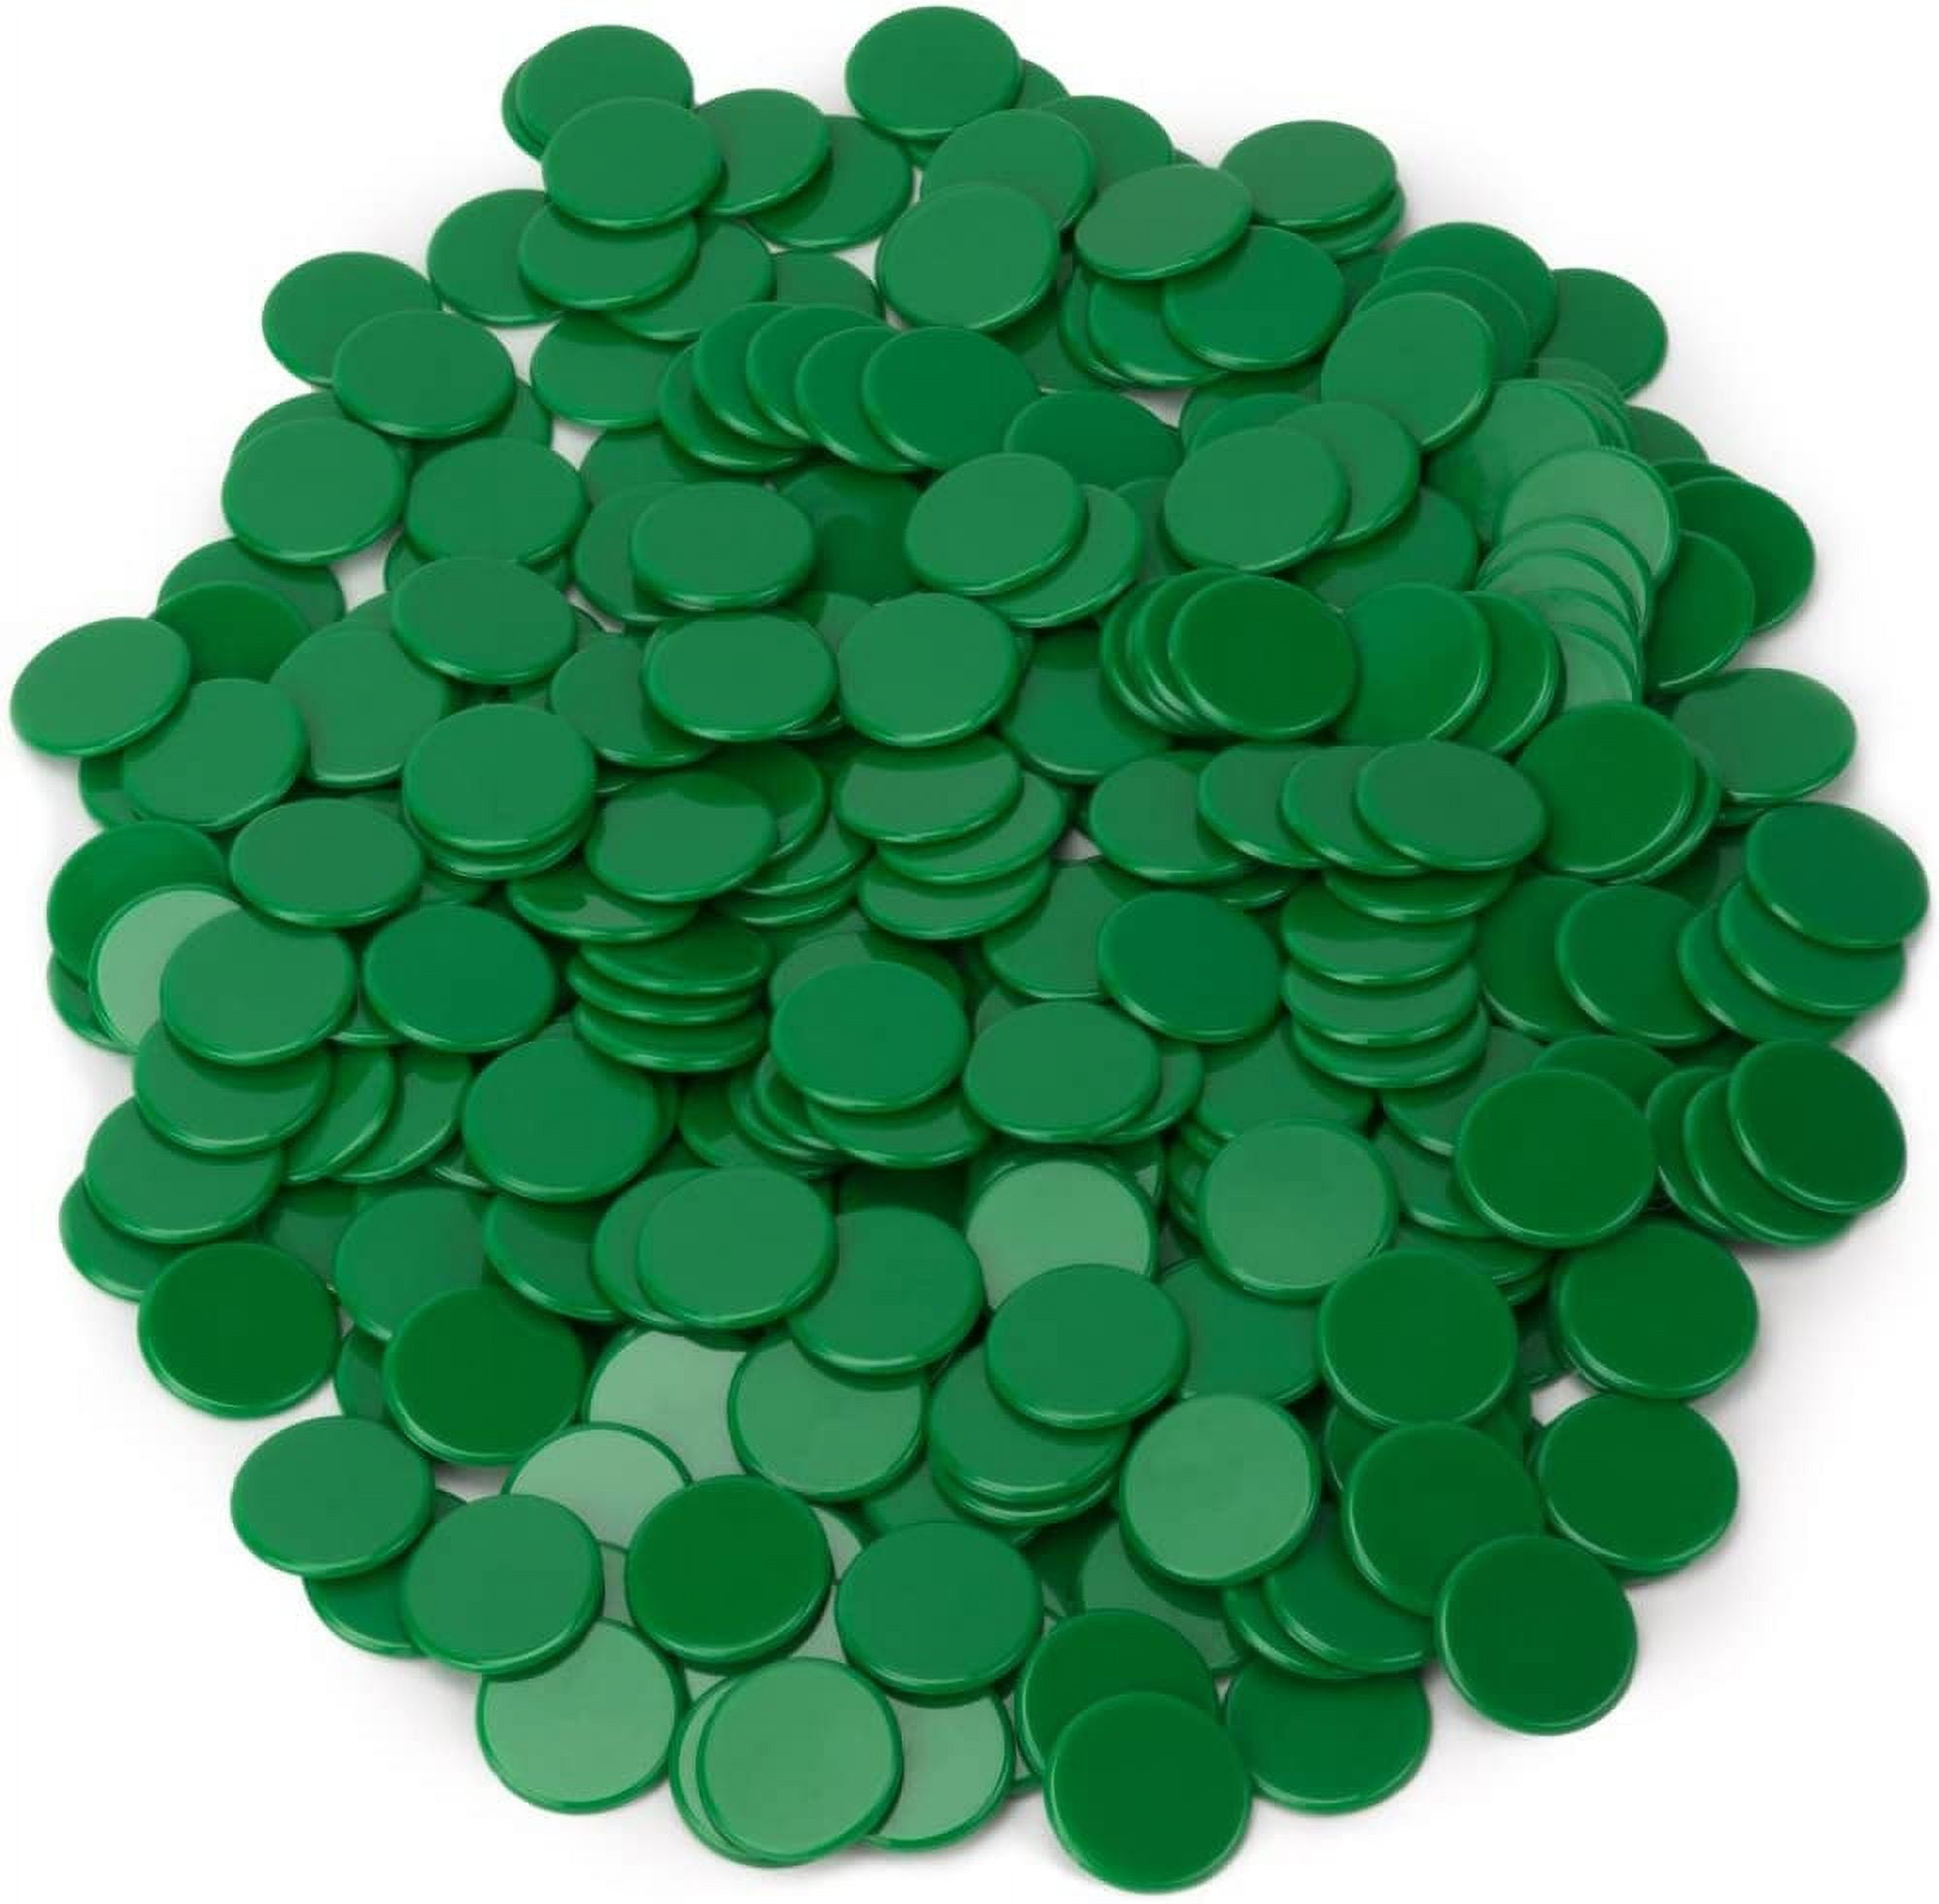 Picture of Brybelly GBIN-052 Solid Green Bingo Chips, Pack of 300